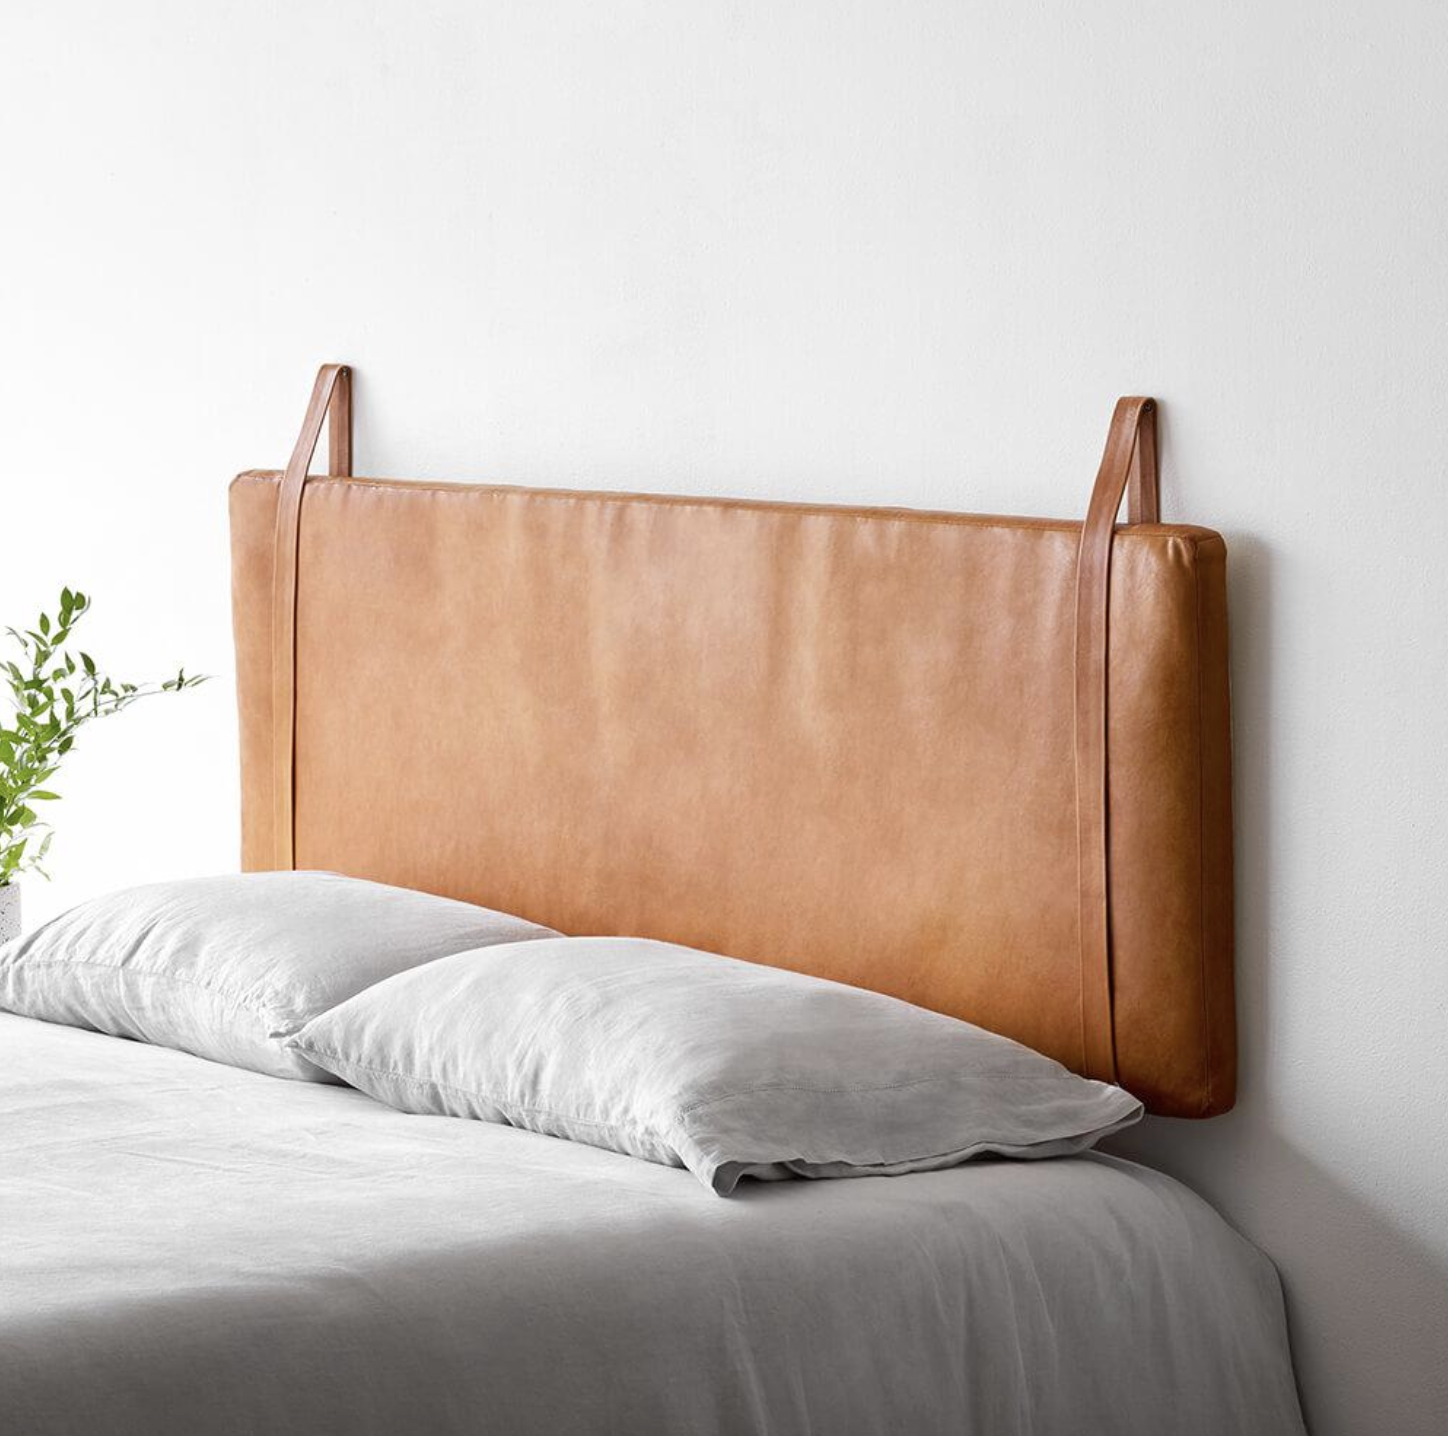 9 Wall Mounted Floating Headboards We, How To Mount A Headboard The Wall Hardware